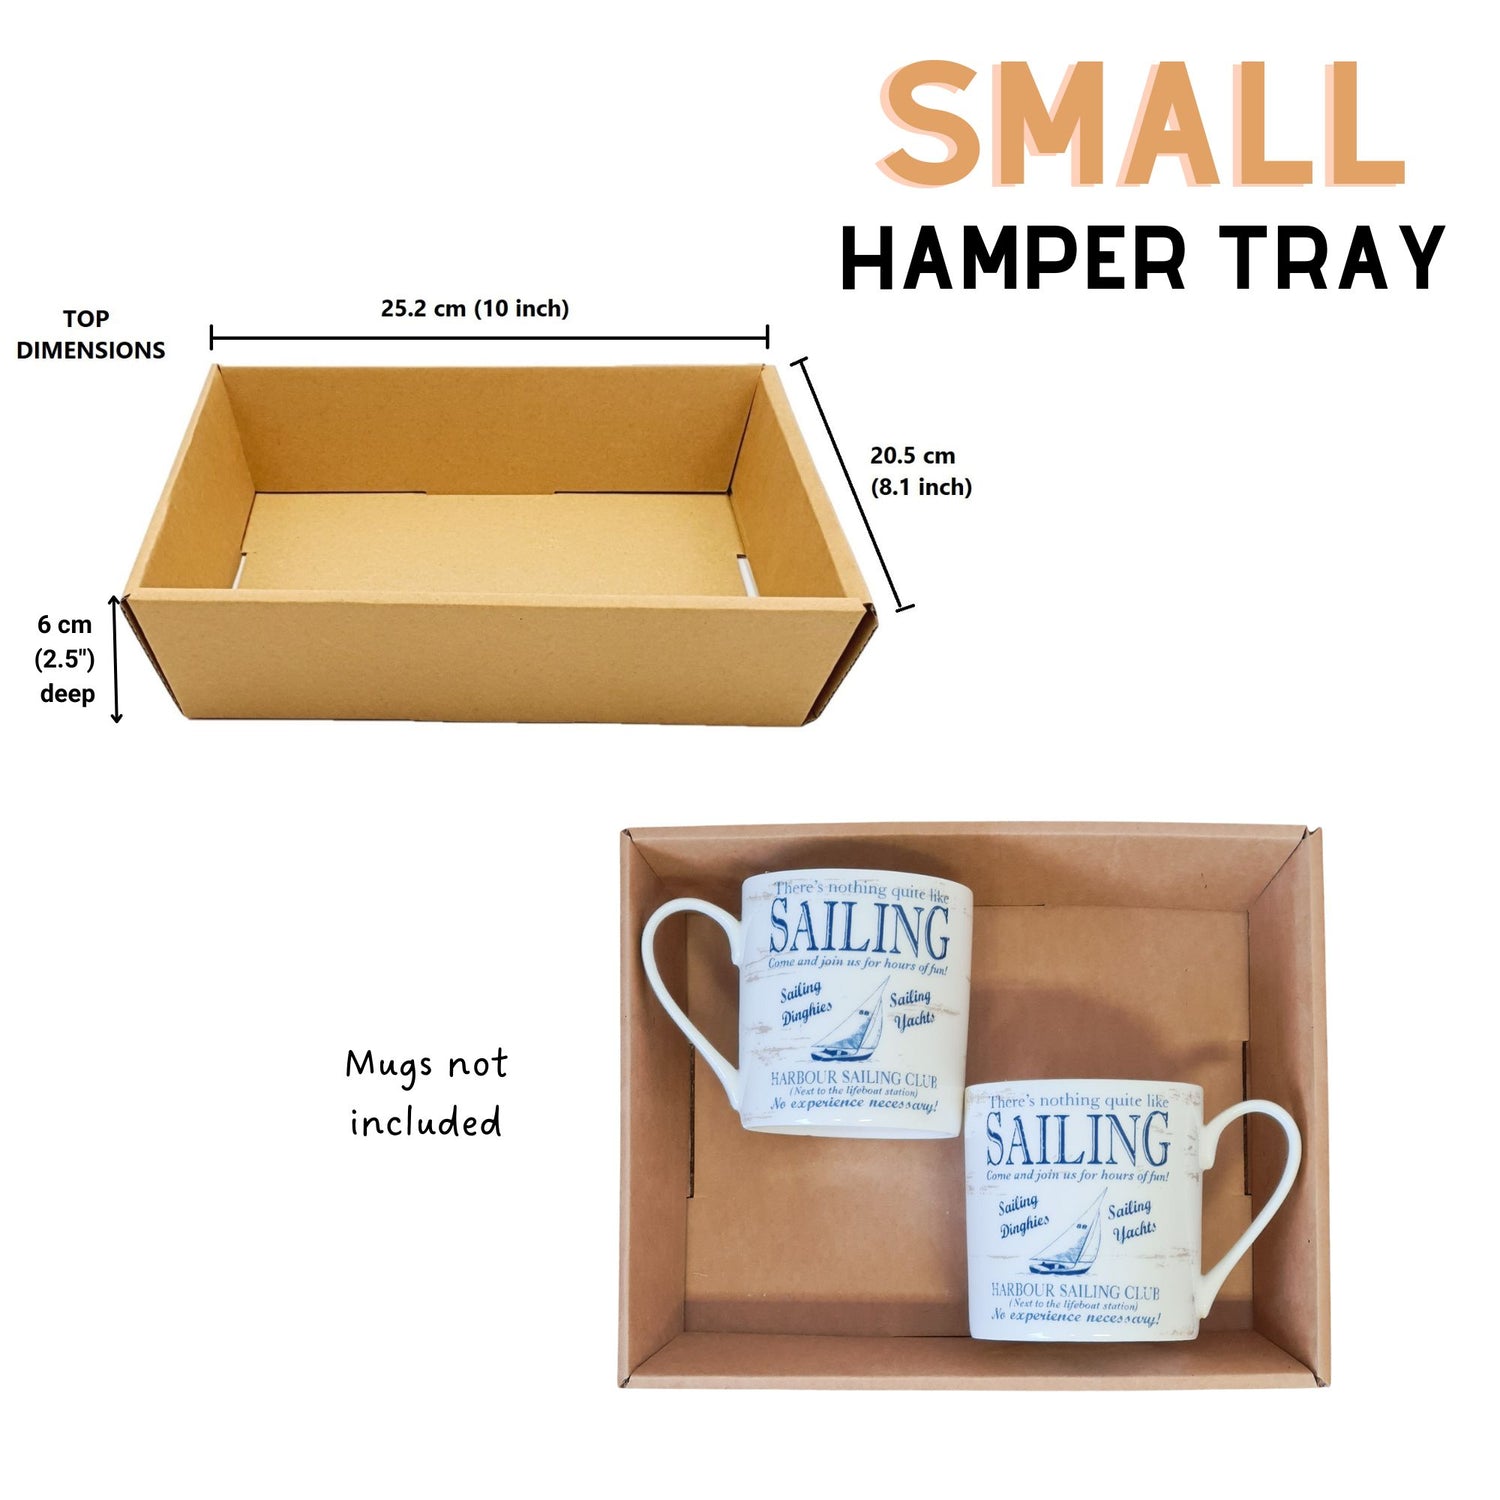 Gift Hamper Tray Manufacturer,Supplier,Exporter from Mumbai, India